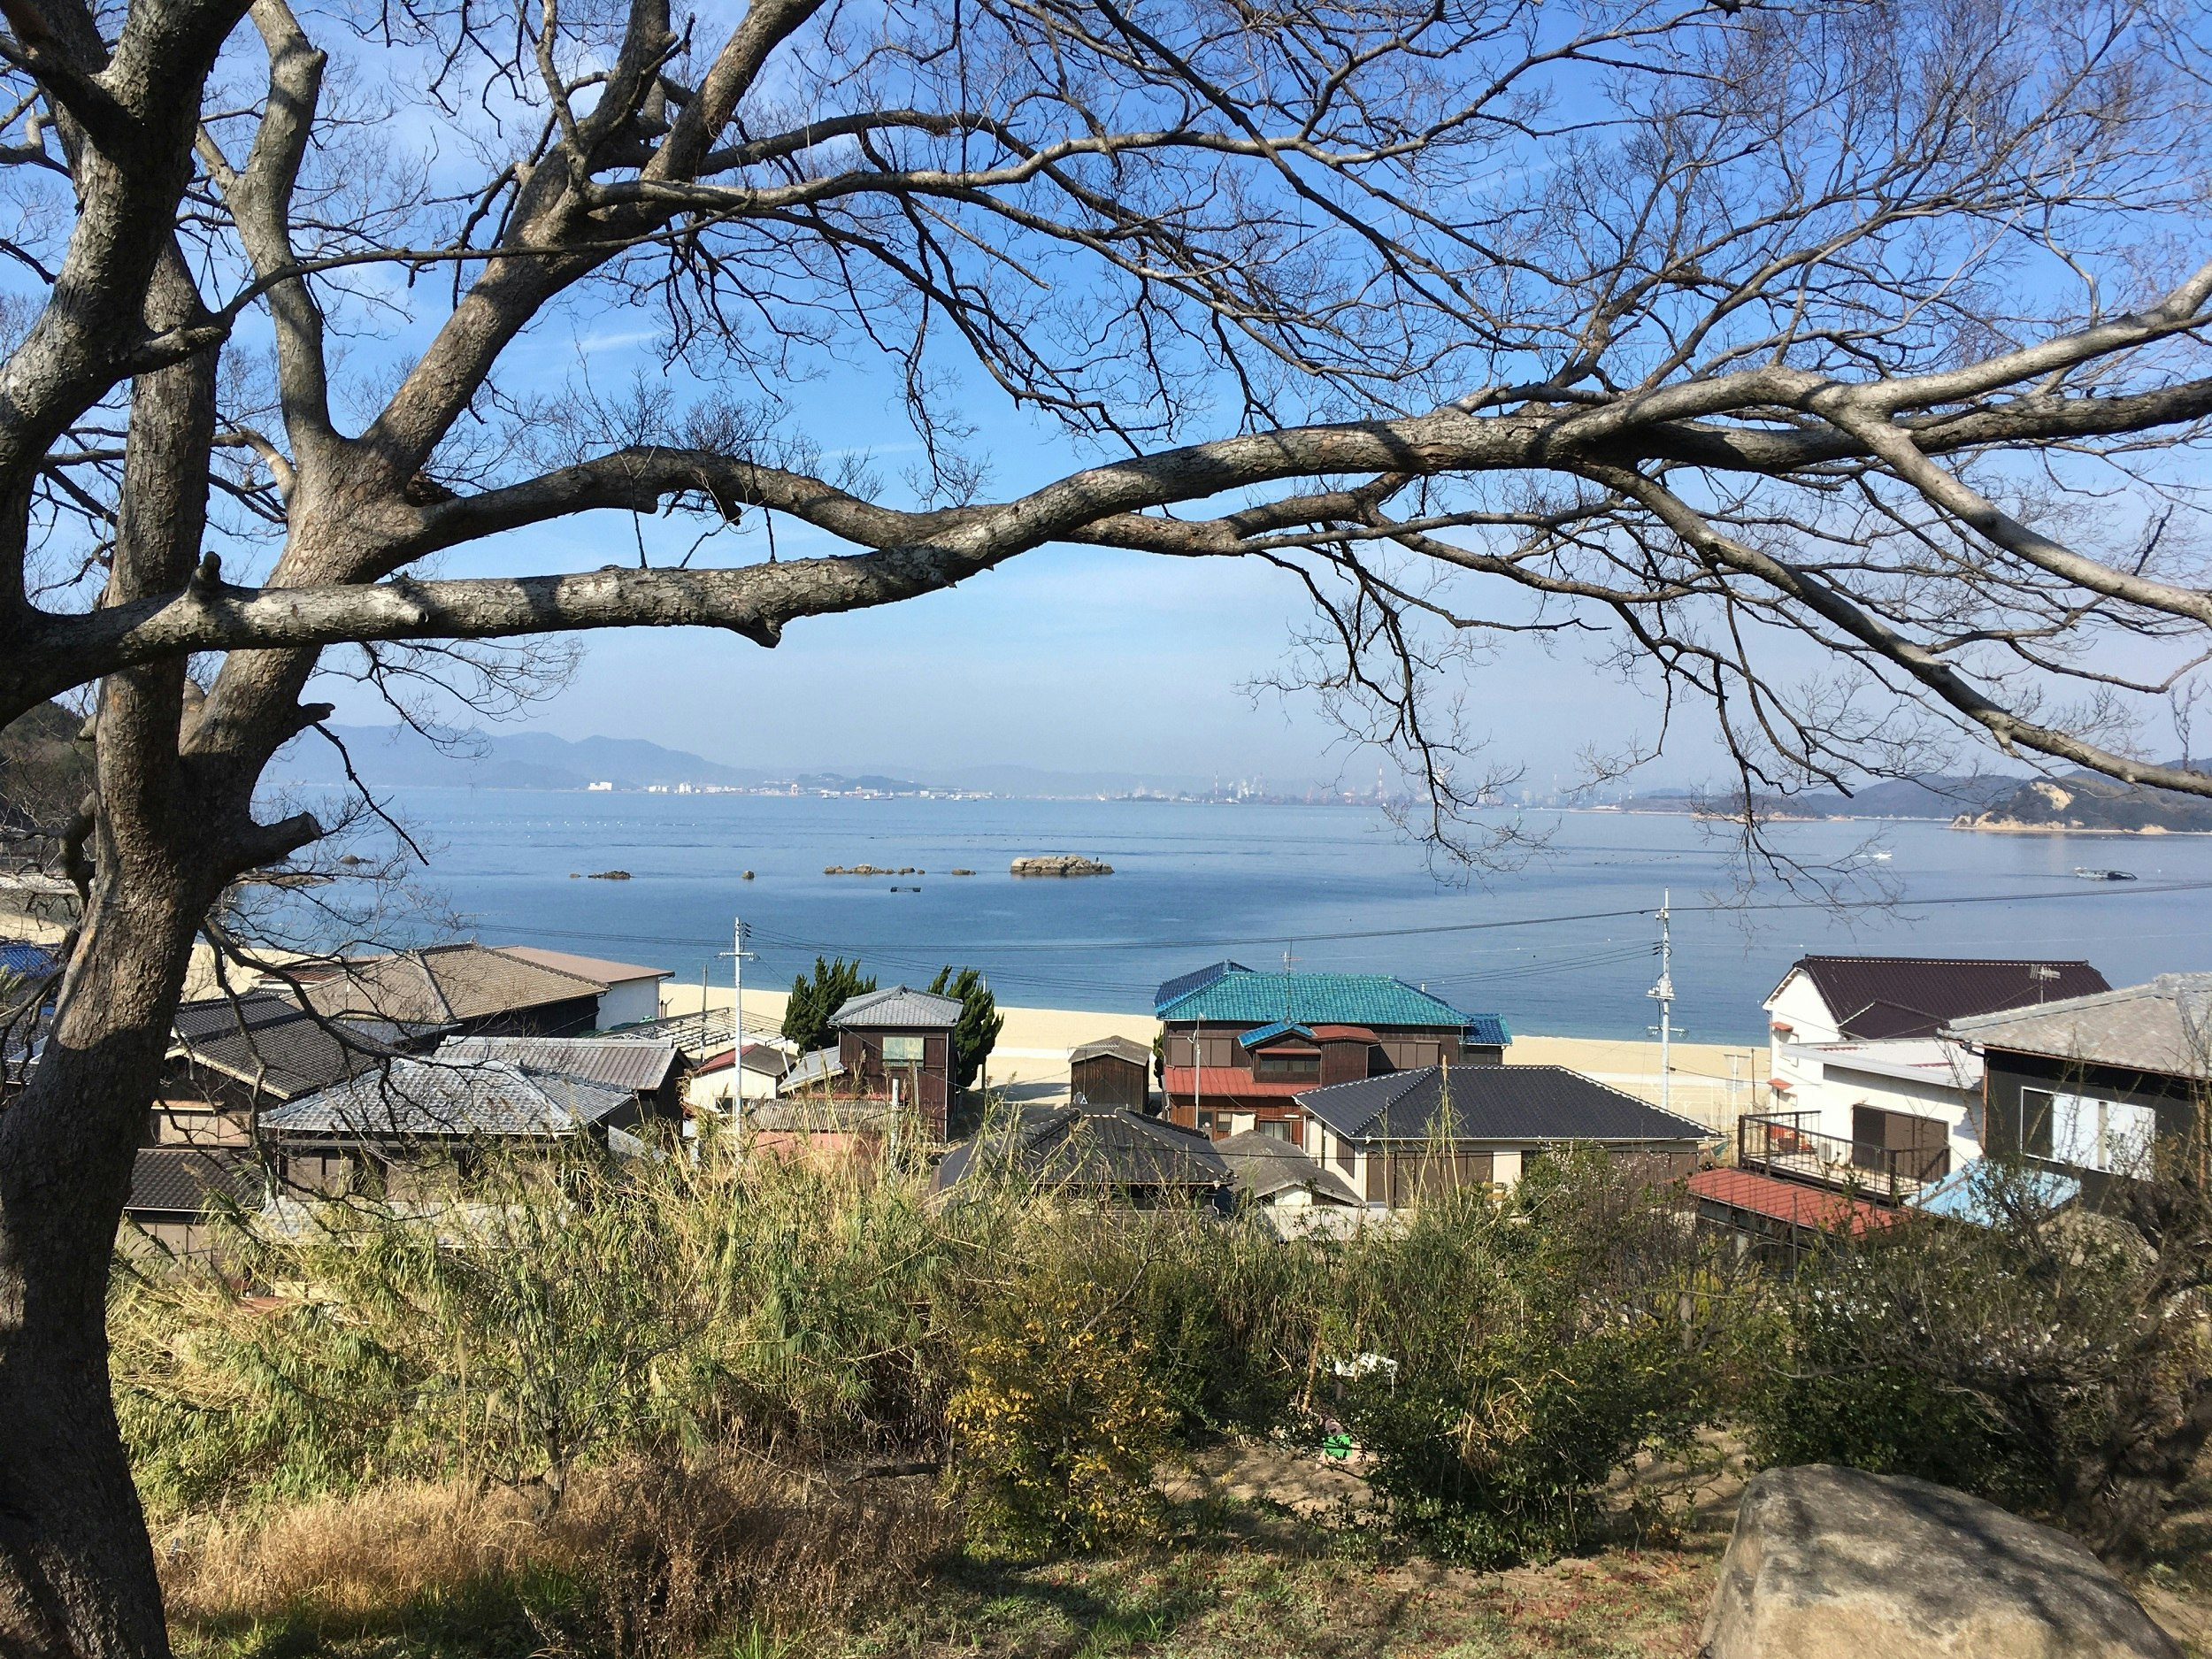 A view down a hillside towards the sea. Traditional wooden Japanese houses line the beach.